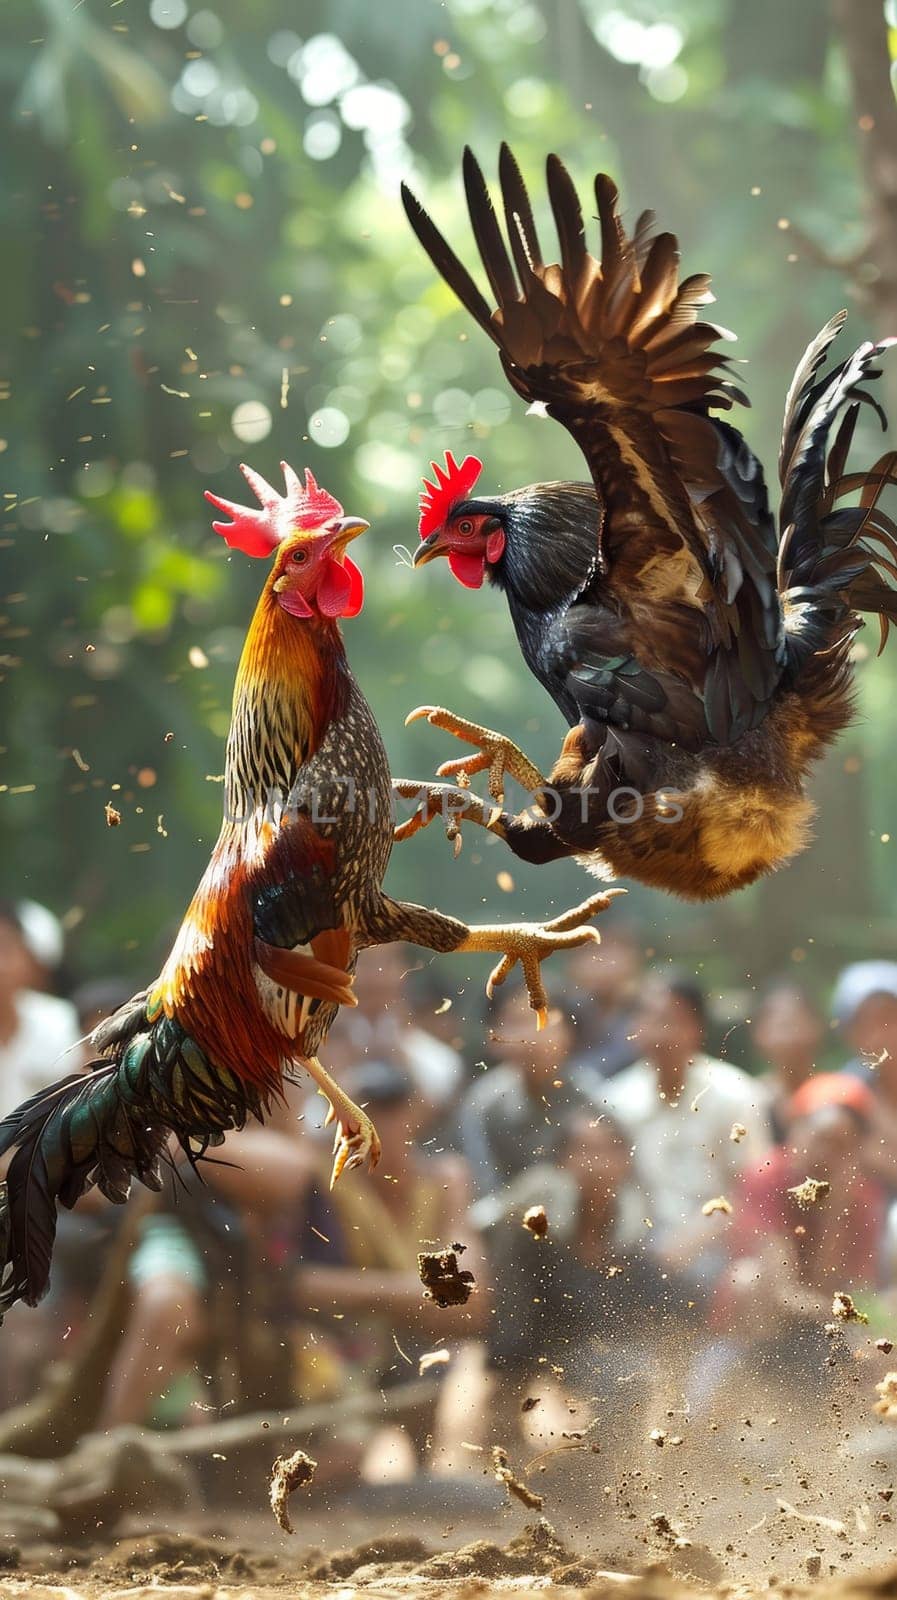 A dynamic cockfight with roosters engaged in battle while surrounded by an attentive crowd in a tropical village setting. by sfinks